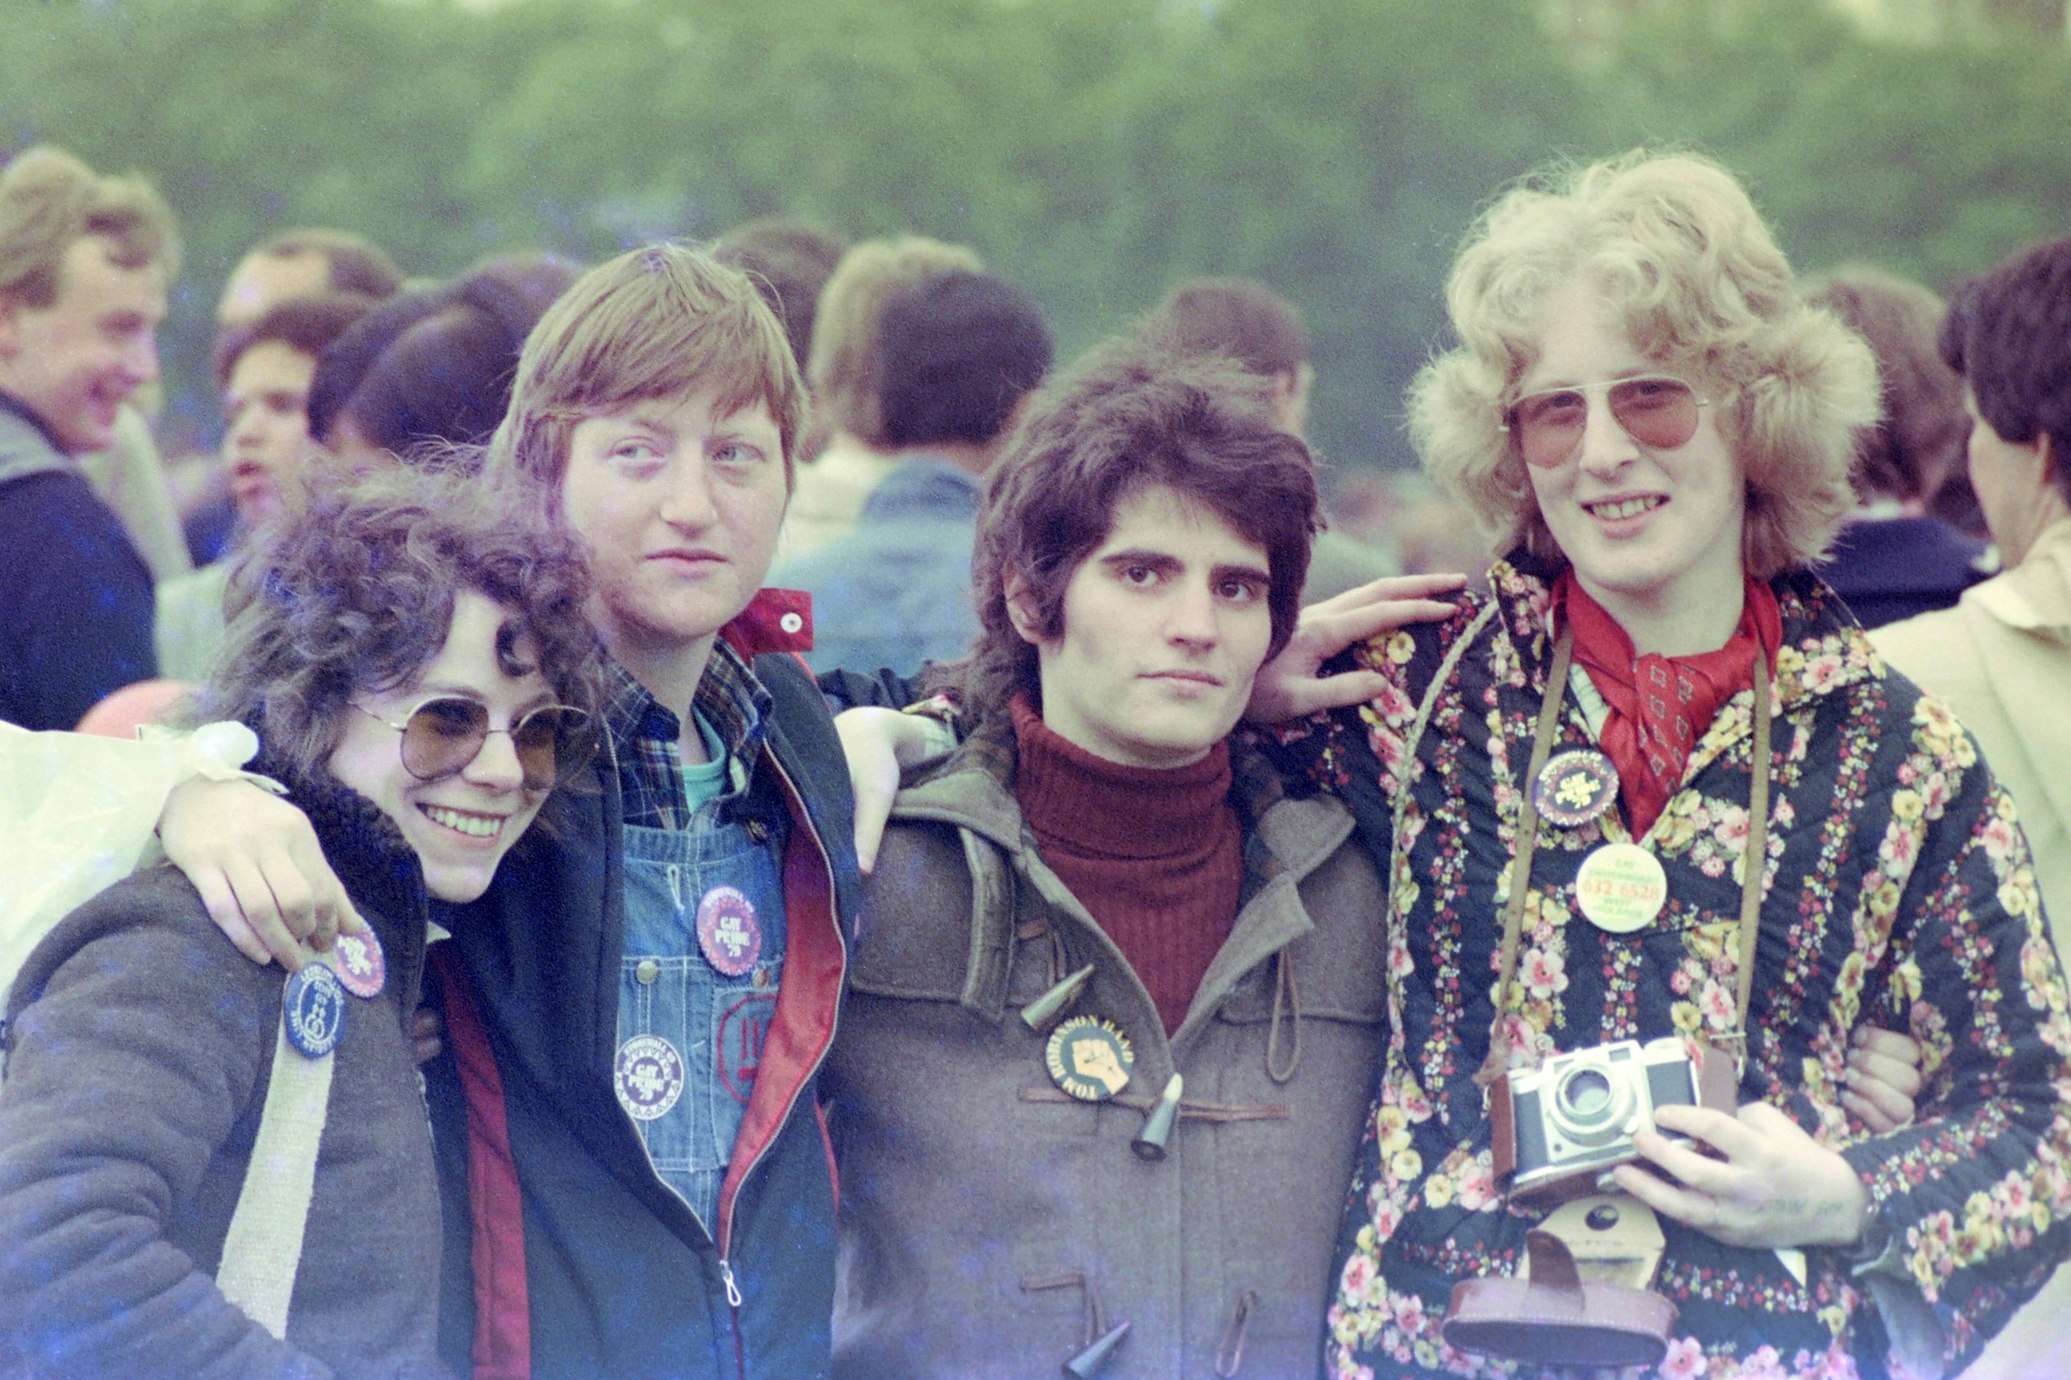 4 friends in the 70s